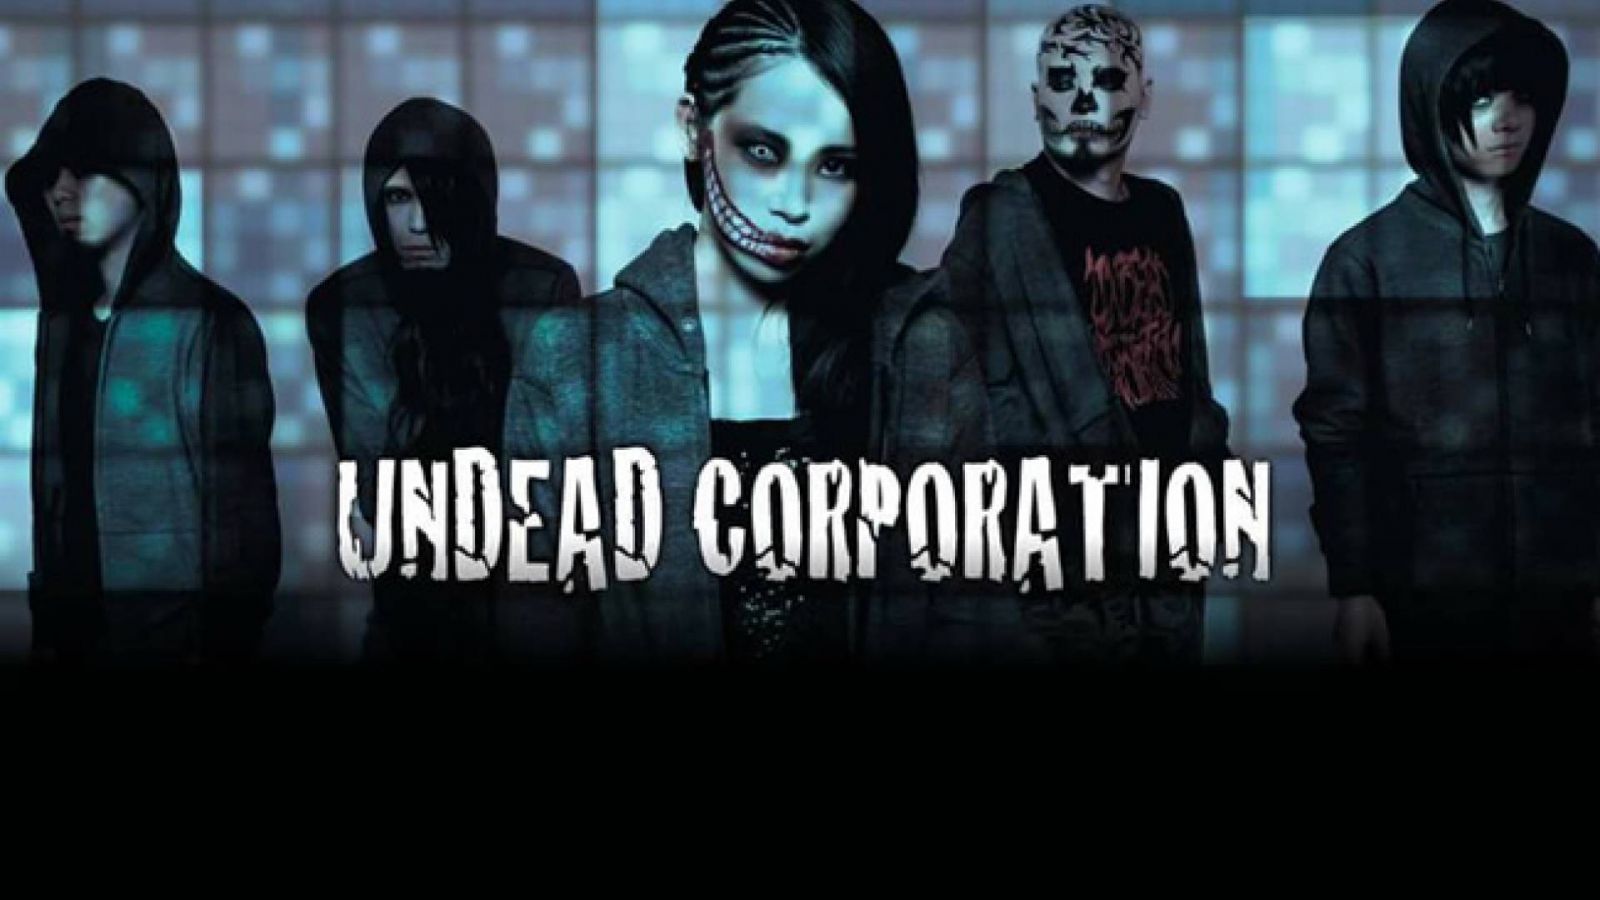 Интервью с UNDEAD CORPORATION © 2015 UNDEAD CORPORATION. All rights reserved.